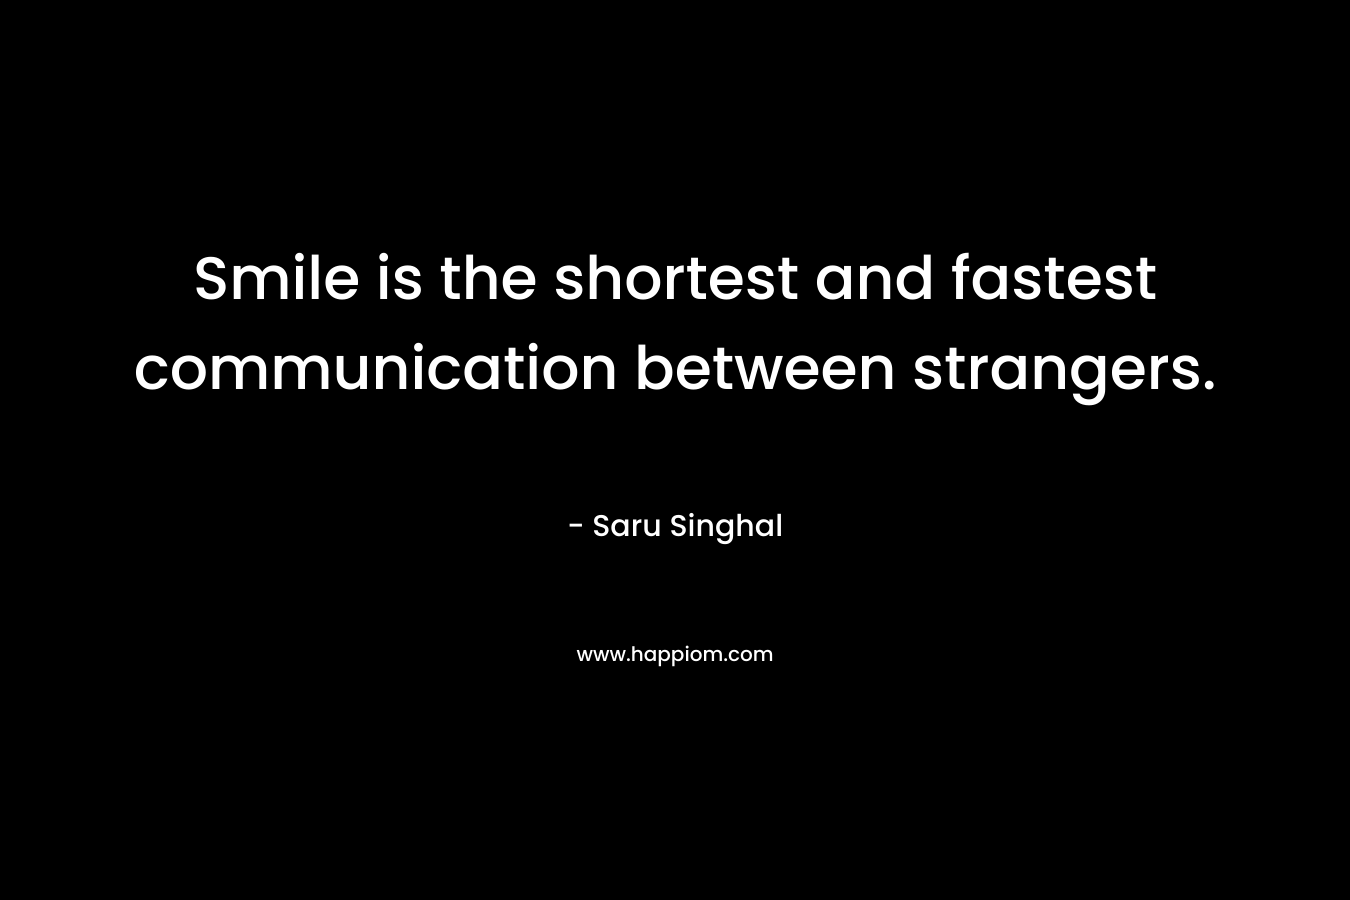 Smile is the shortest and fastest communication between strangers.